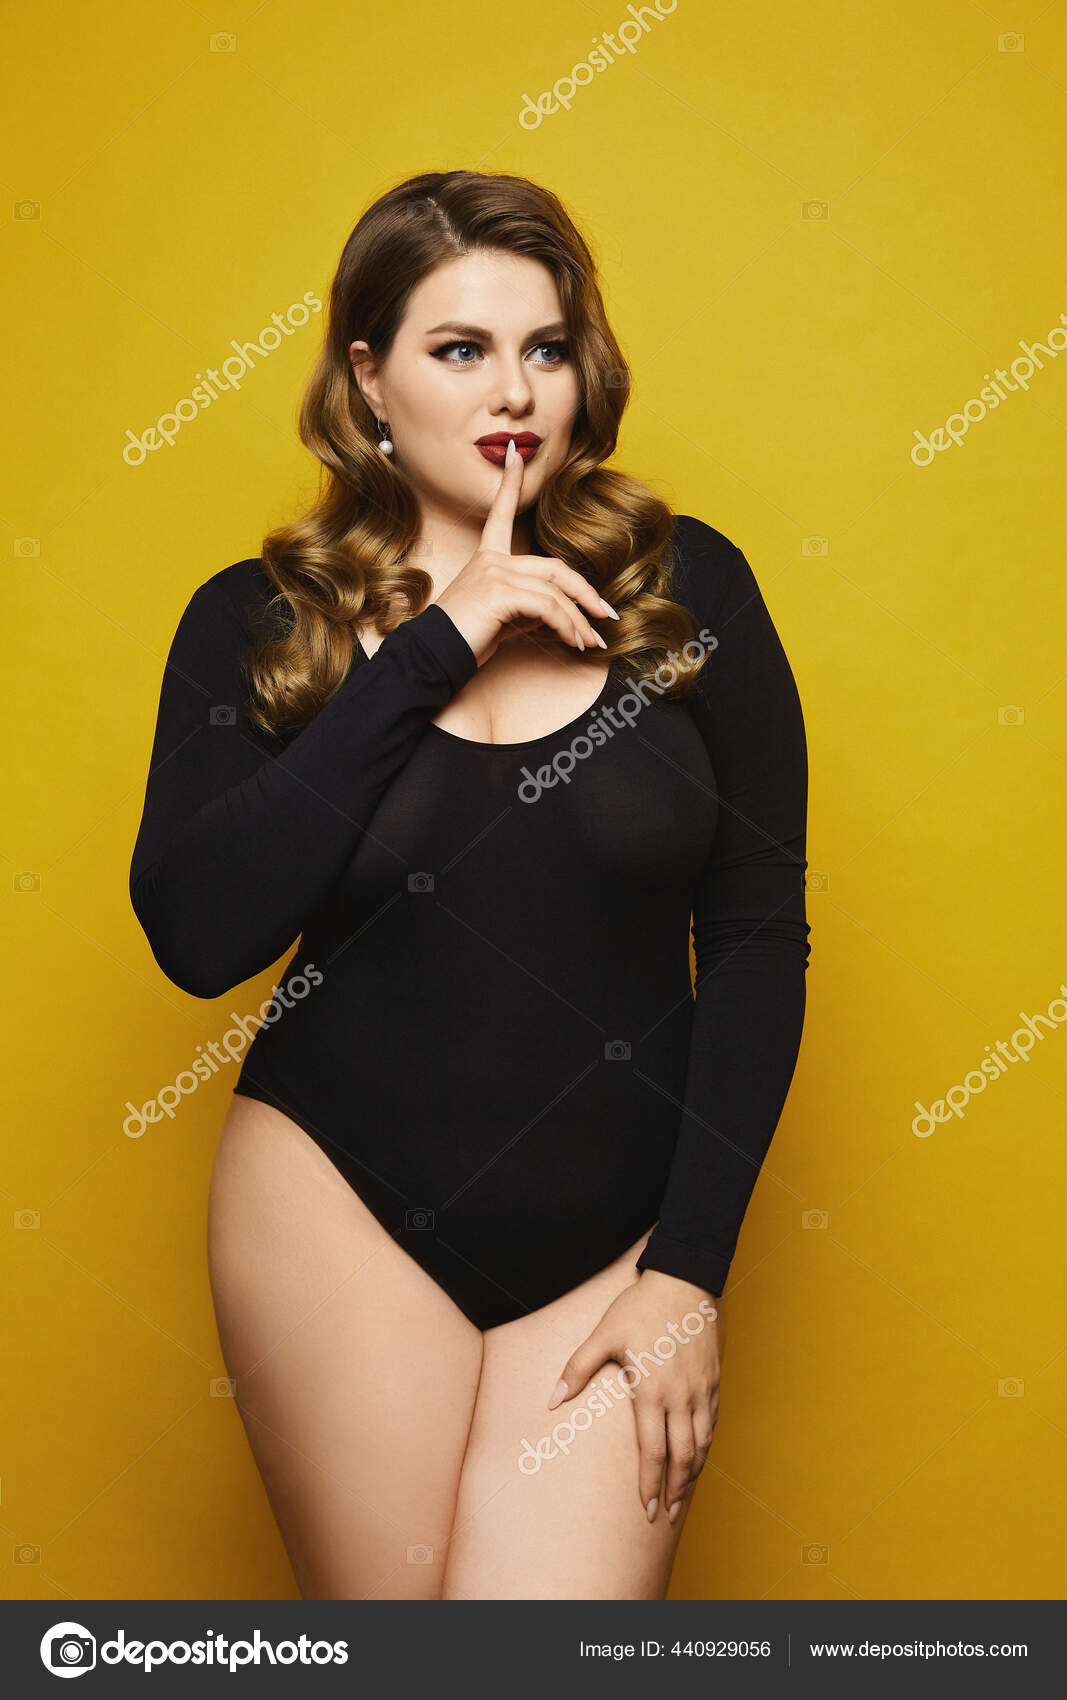 Plus size sexy model girl, with bright makeup, in black bodysuit